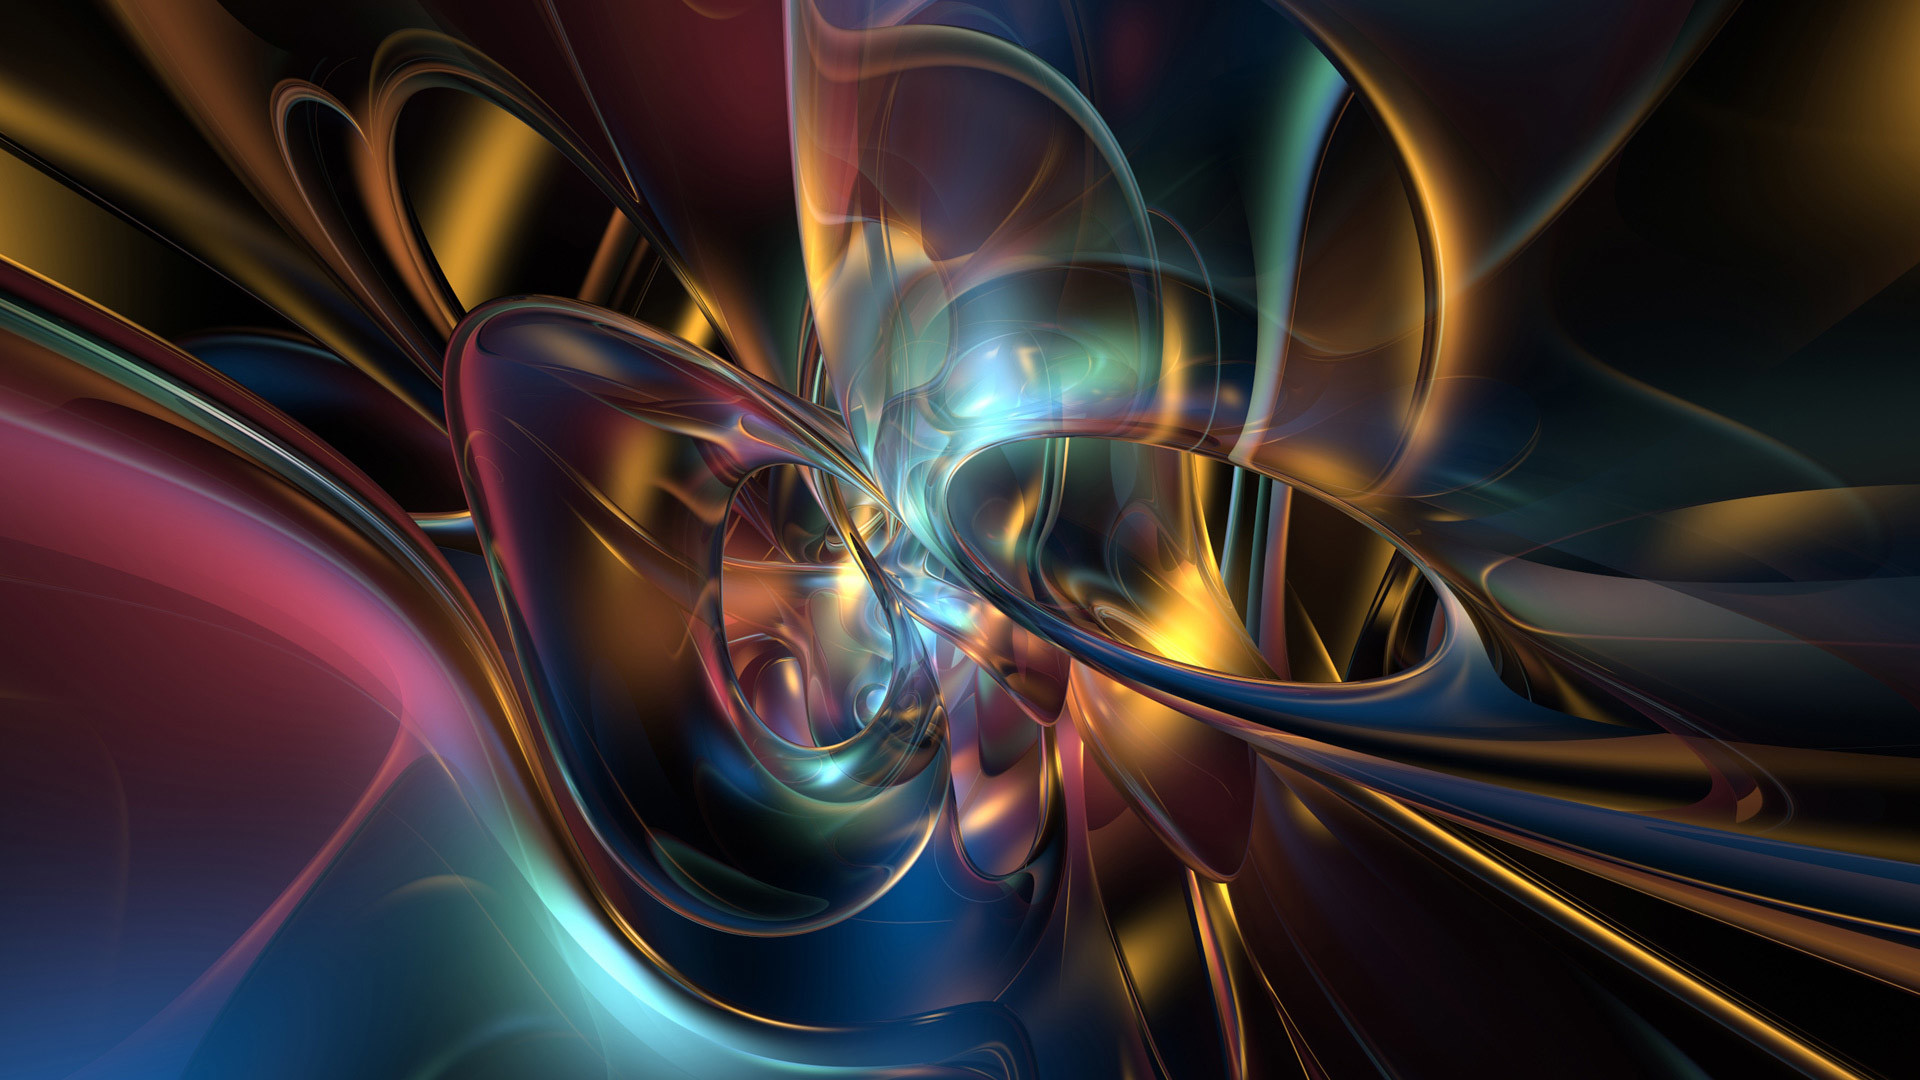 1920x1080 HD 3D Abstract Wallpapers 1080p (76 Wallpapers)